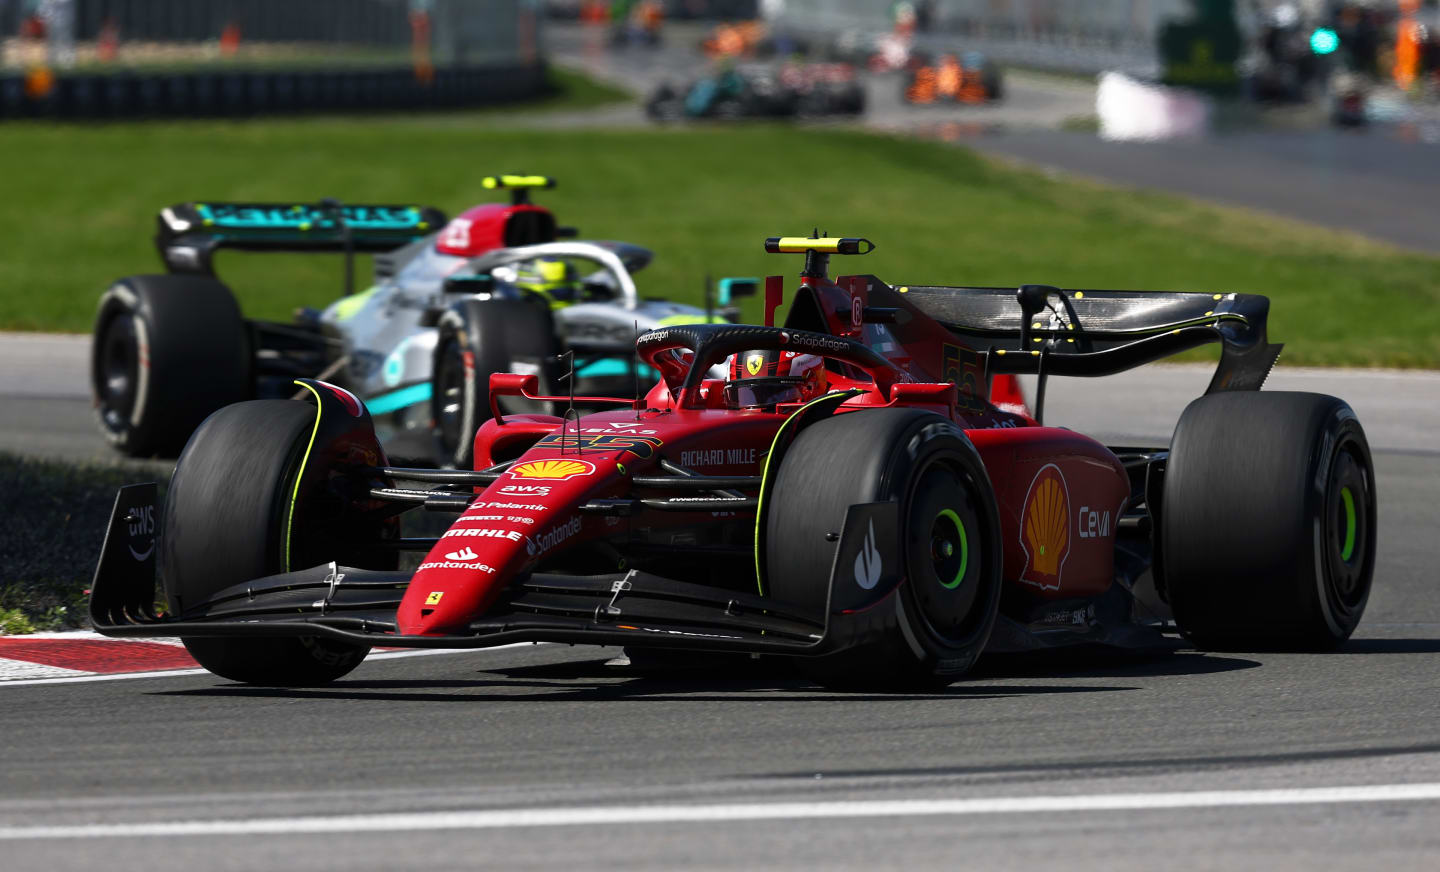 MONTREAL, QUEBEC - JUNE 19: Carlos Sainz of Spain driving (55) the Ferrari F1-75 leads Lewis Hamilton of Great Britain driving the (44) Mercedes AMG Petronas F1 Team W13 during the F1 Grand Prix of Canada at Circuit Gilles Villeneuve on June 19, 2022 in Montreal, Quebec. (Photo by Lars Baron - Formula 1/Formula 1 via Getty Images)